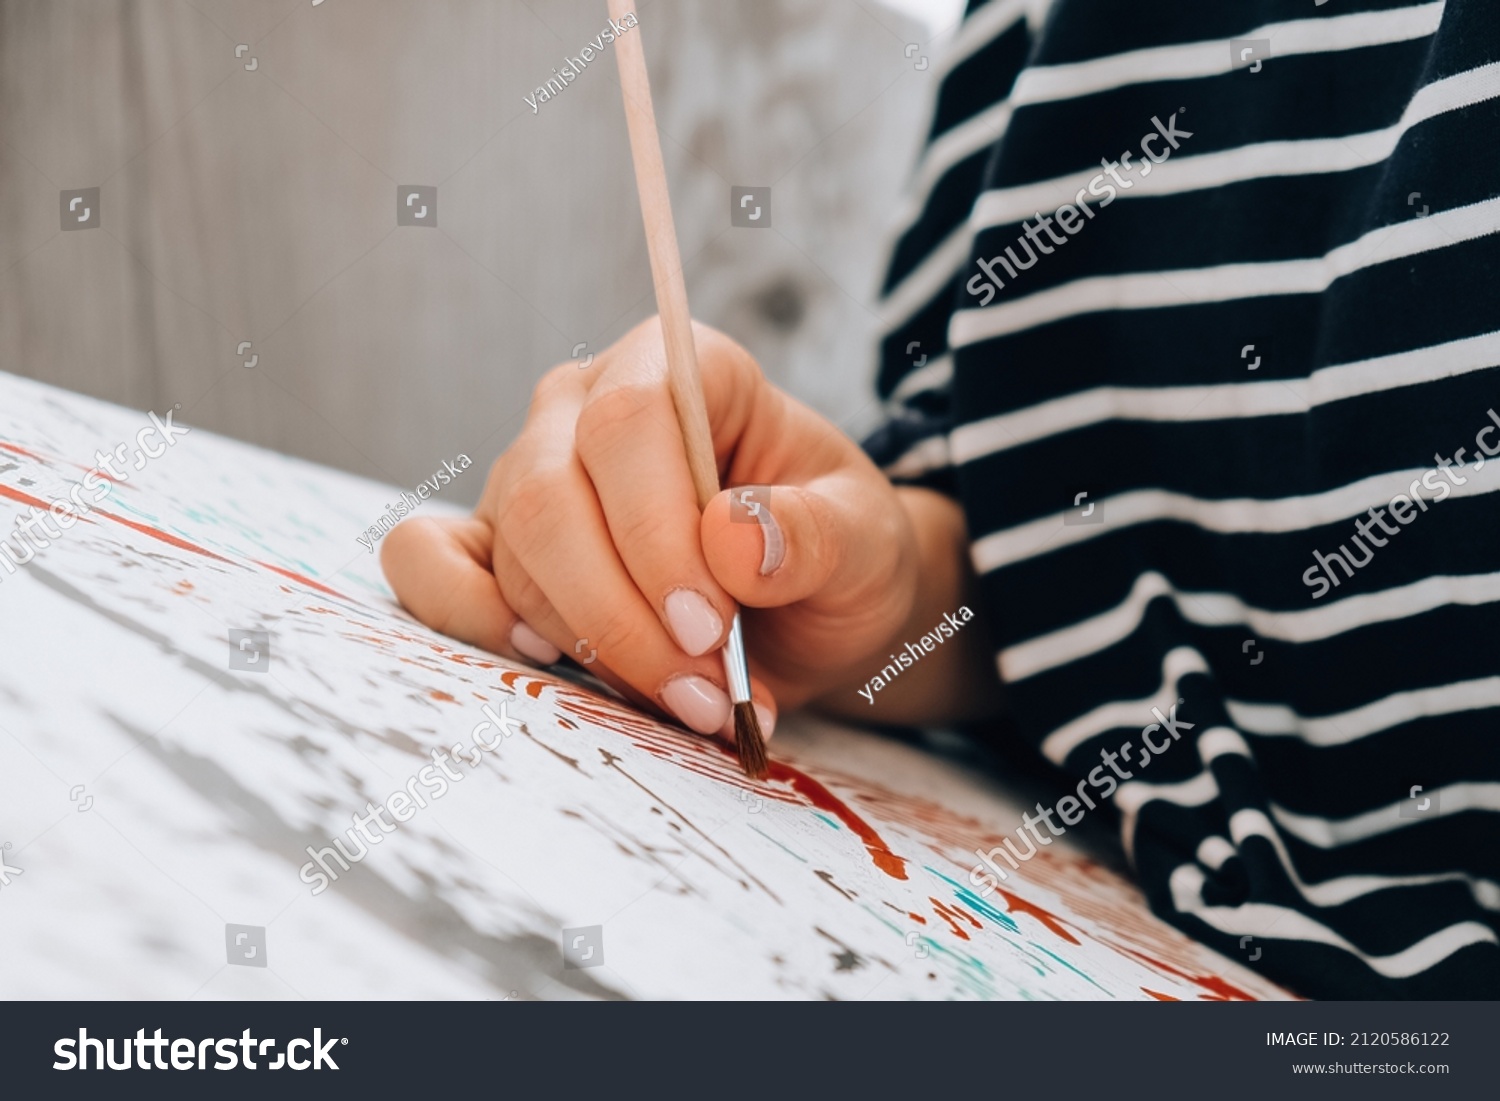 Painting on canvas by numbers and numbered jars of paint. Woman draws with a brush painting by numbers on canvas. Creative hobby. Painting for beginners. Leisure activity for stay home lockdown #2120586122